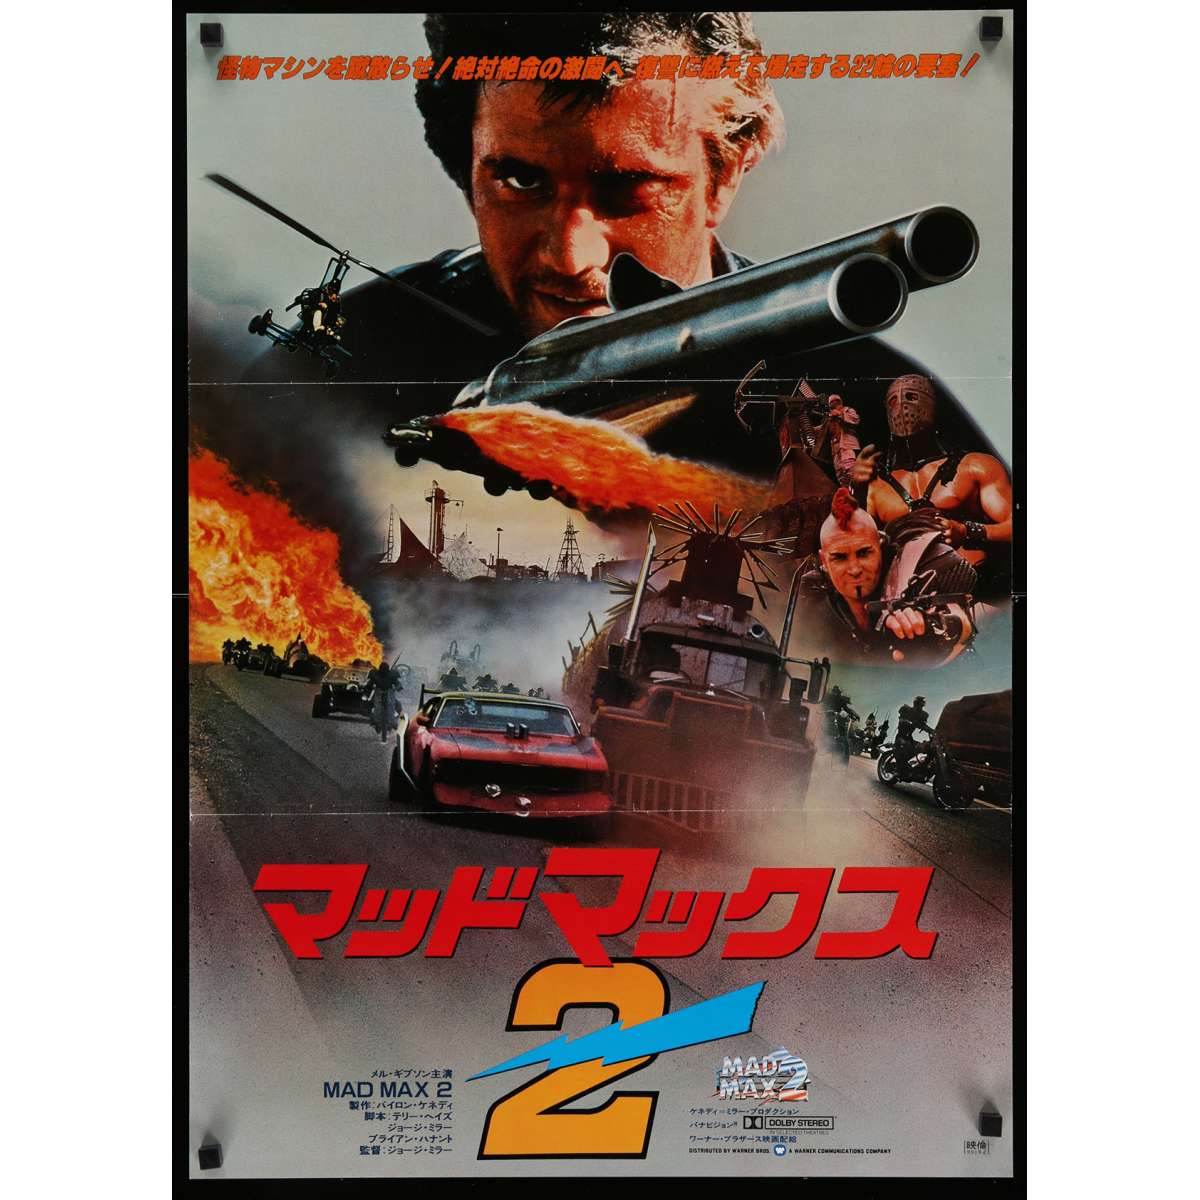 mad-max-2-the-road-warrior-japanese-movie-poster-20x29-1978-george-miller-mel-gibson.jpg